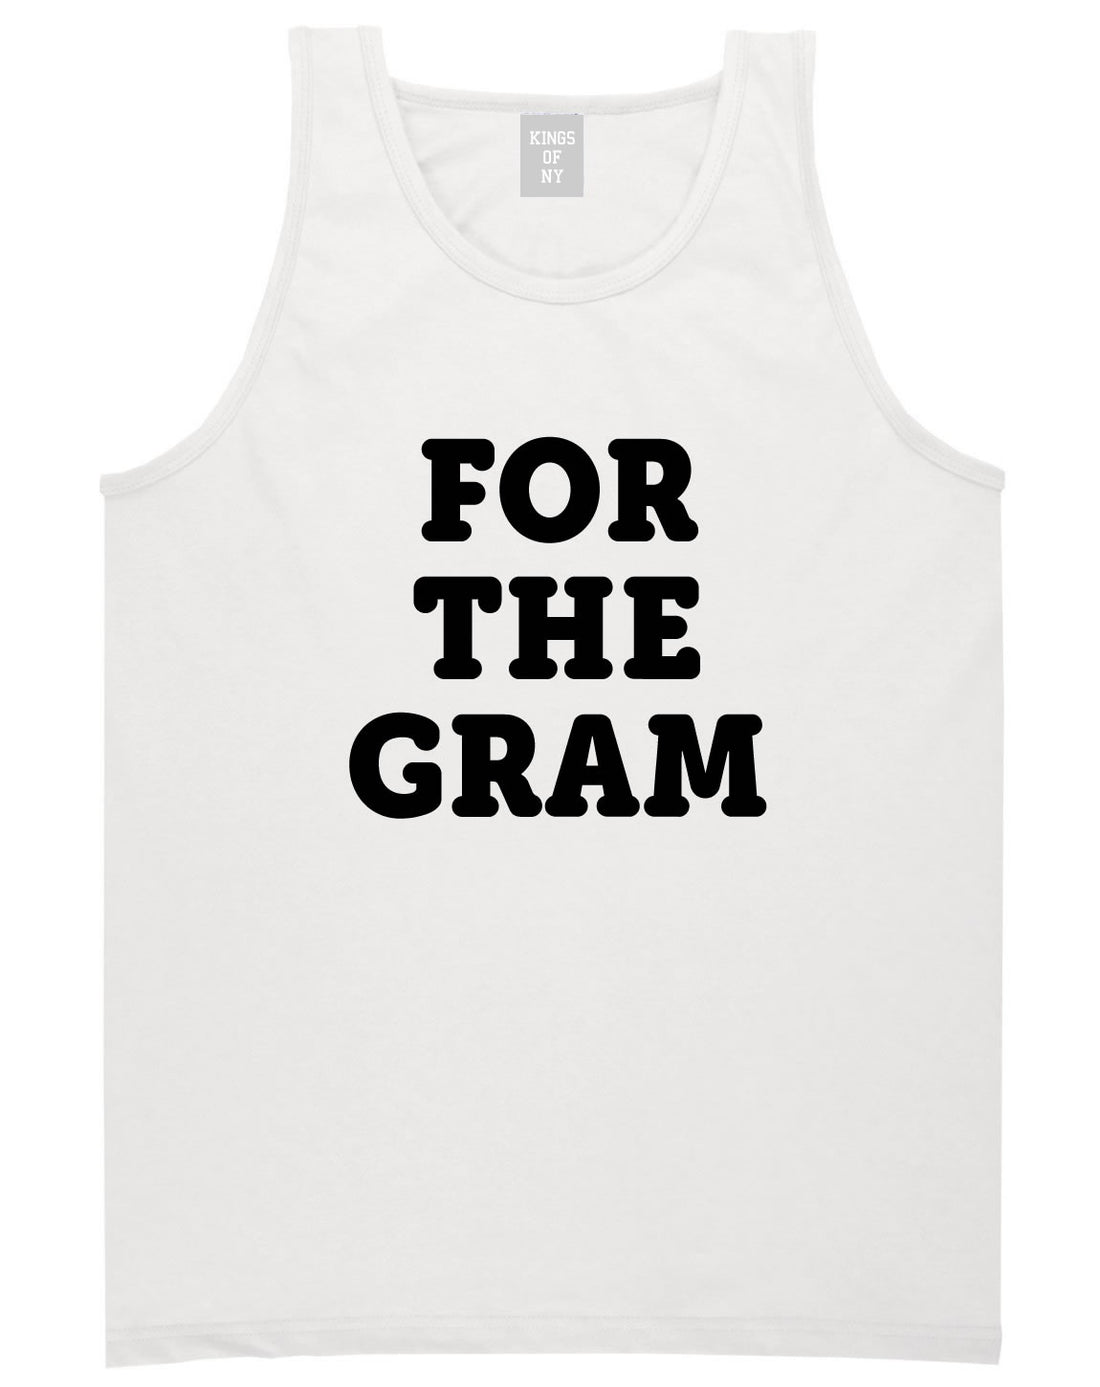 Do It For The Gram Tank Top by Kings Of NY